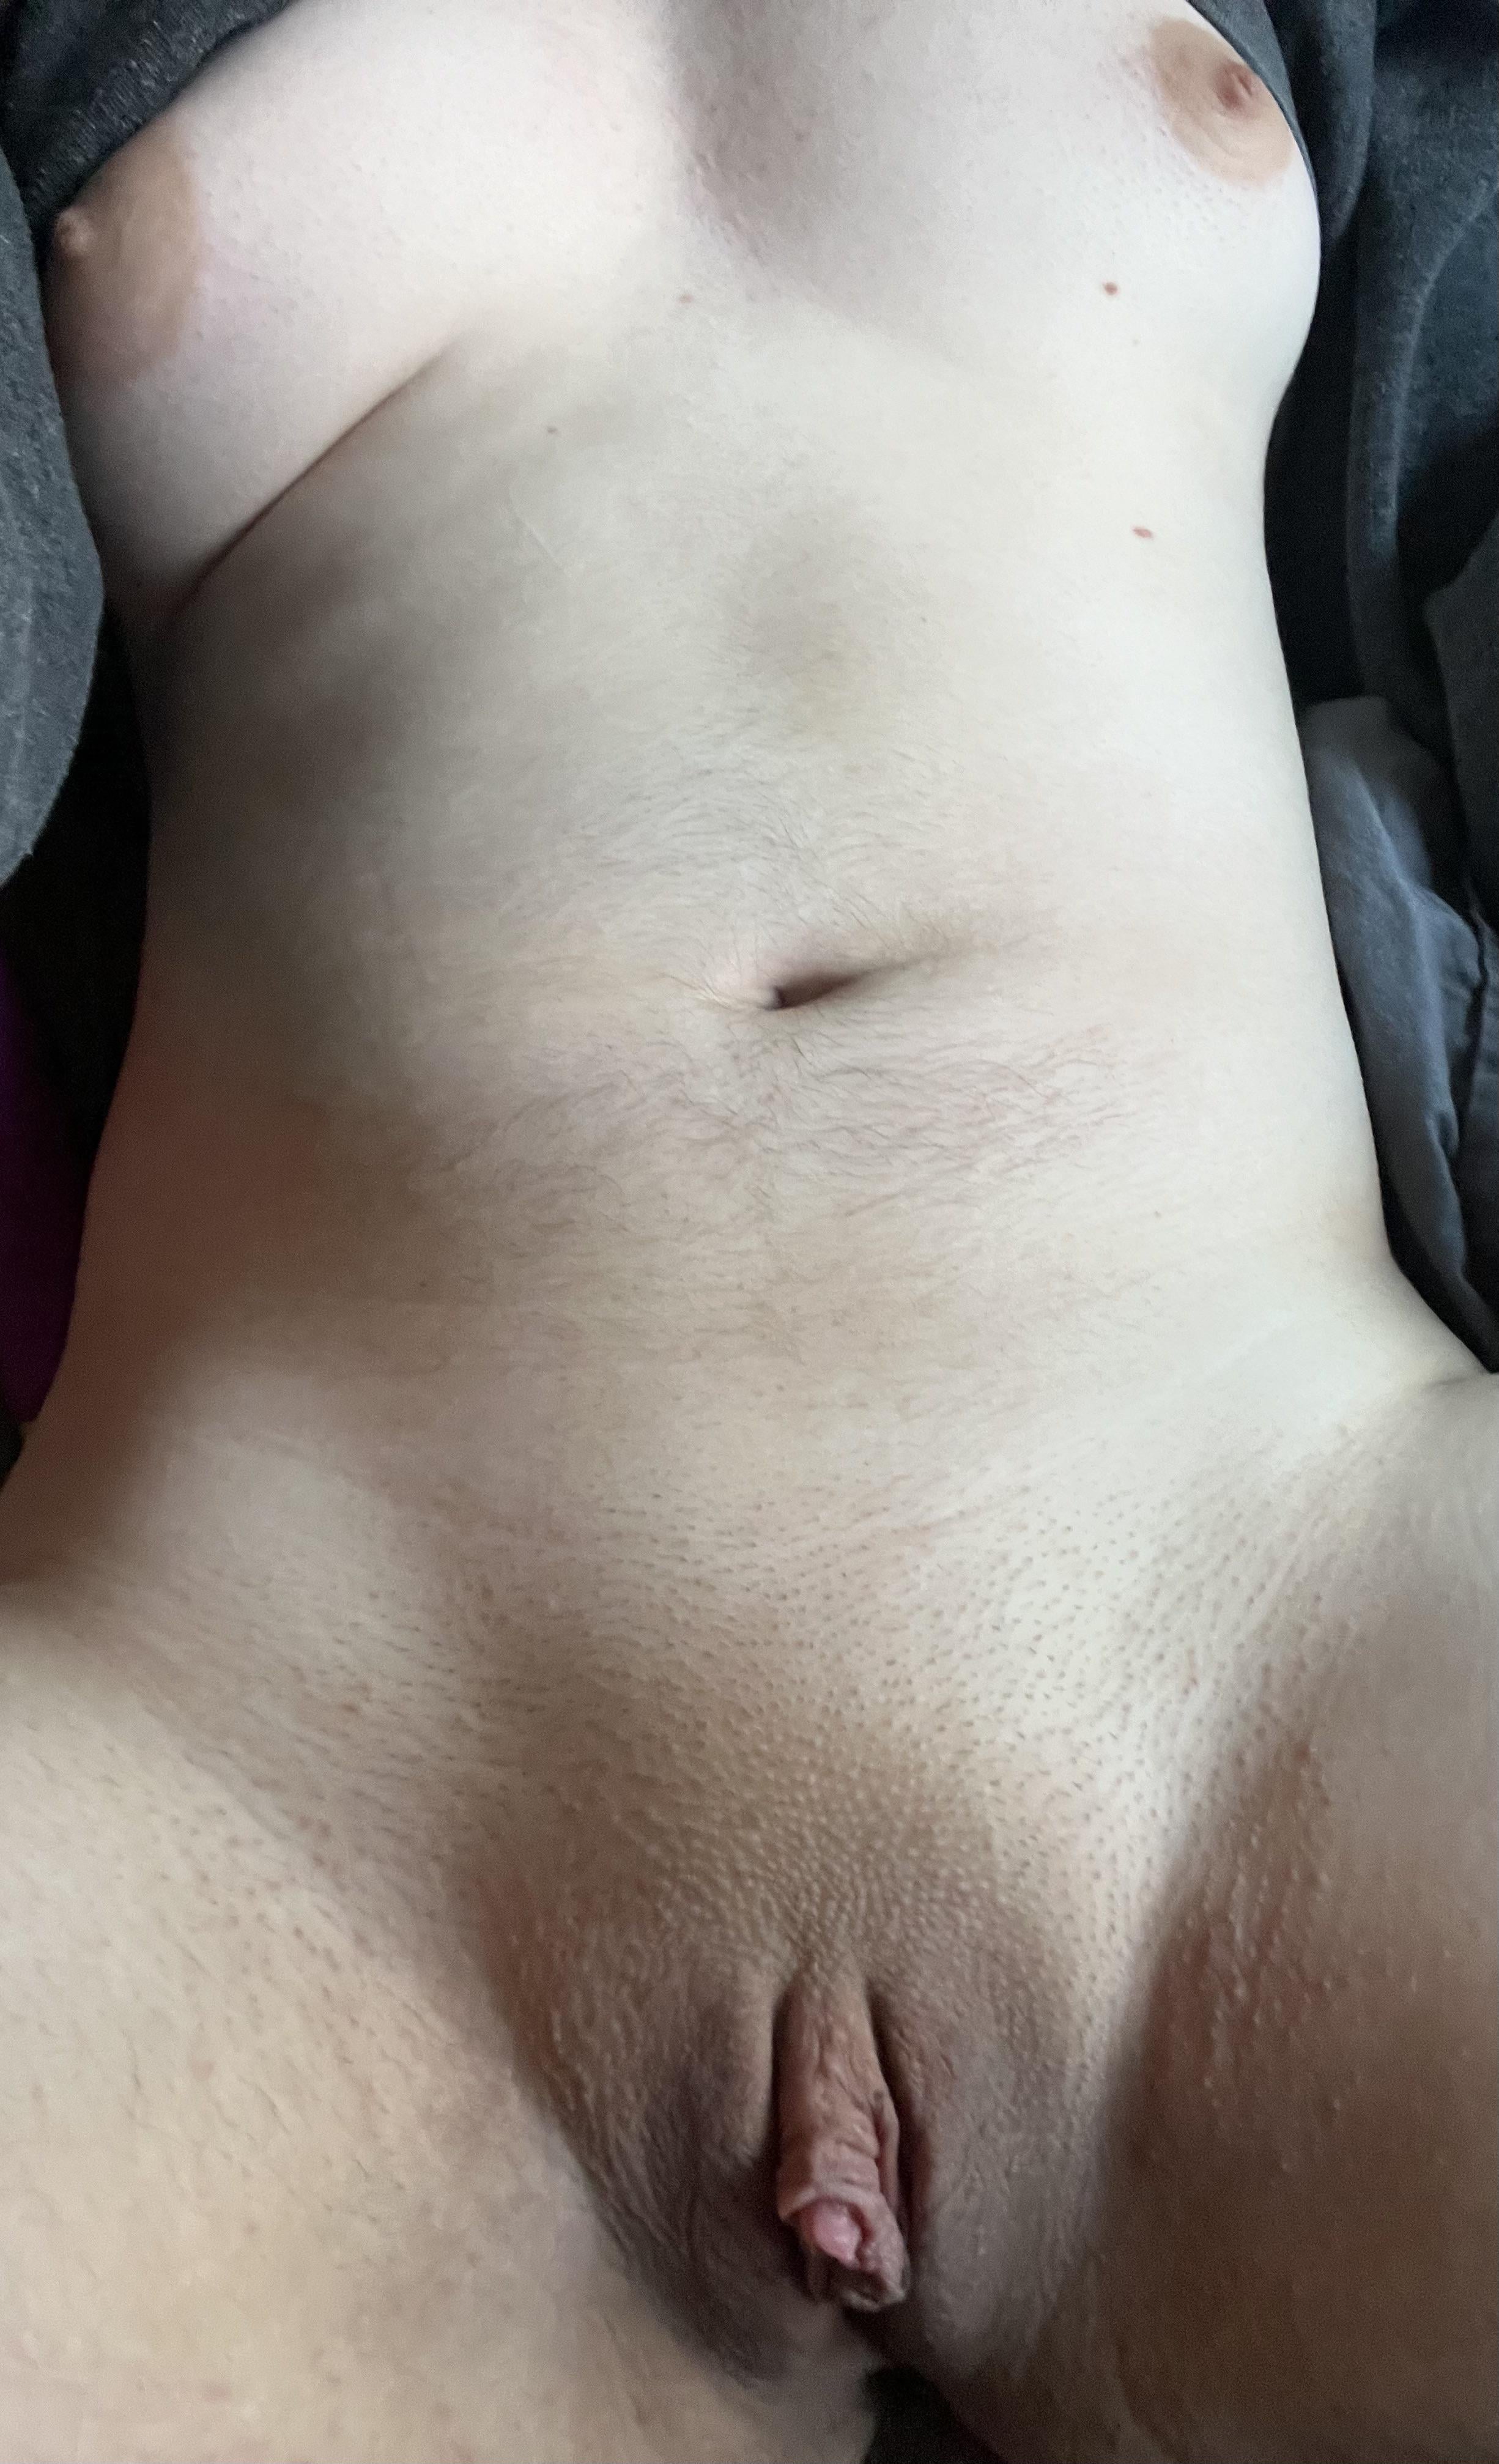 ftm 18 give me endless creampies